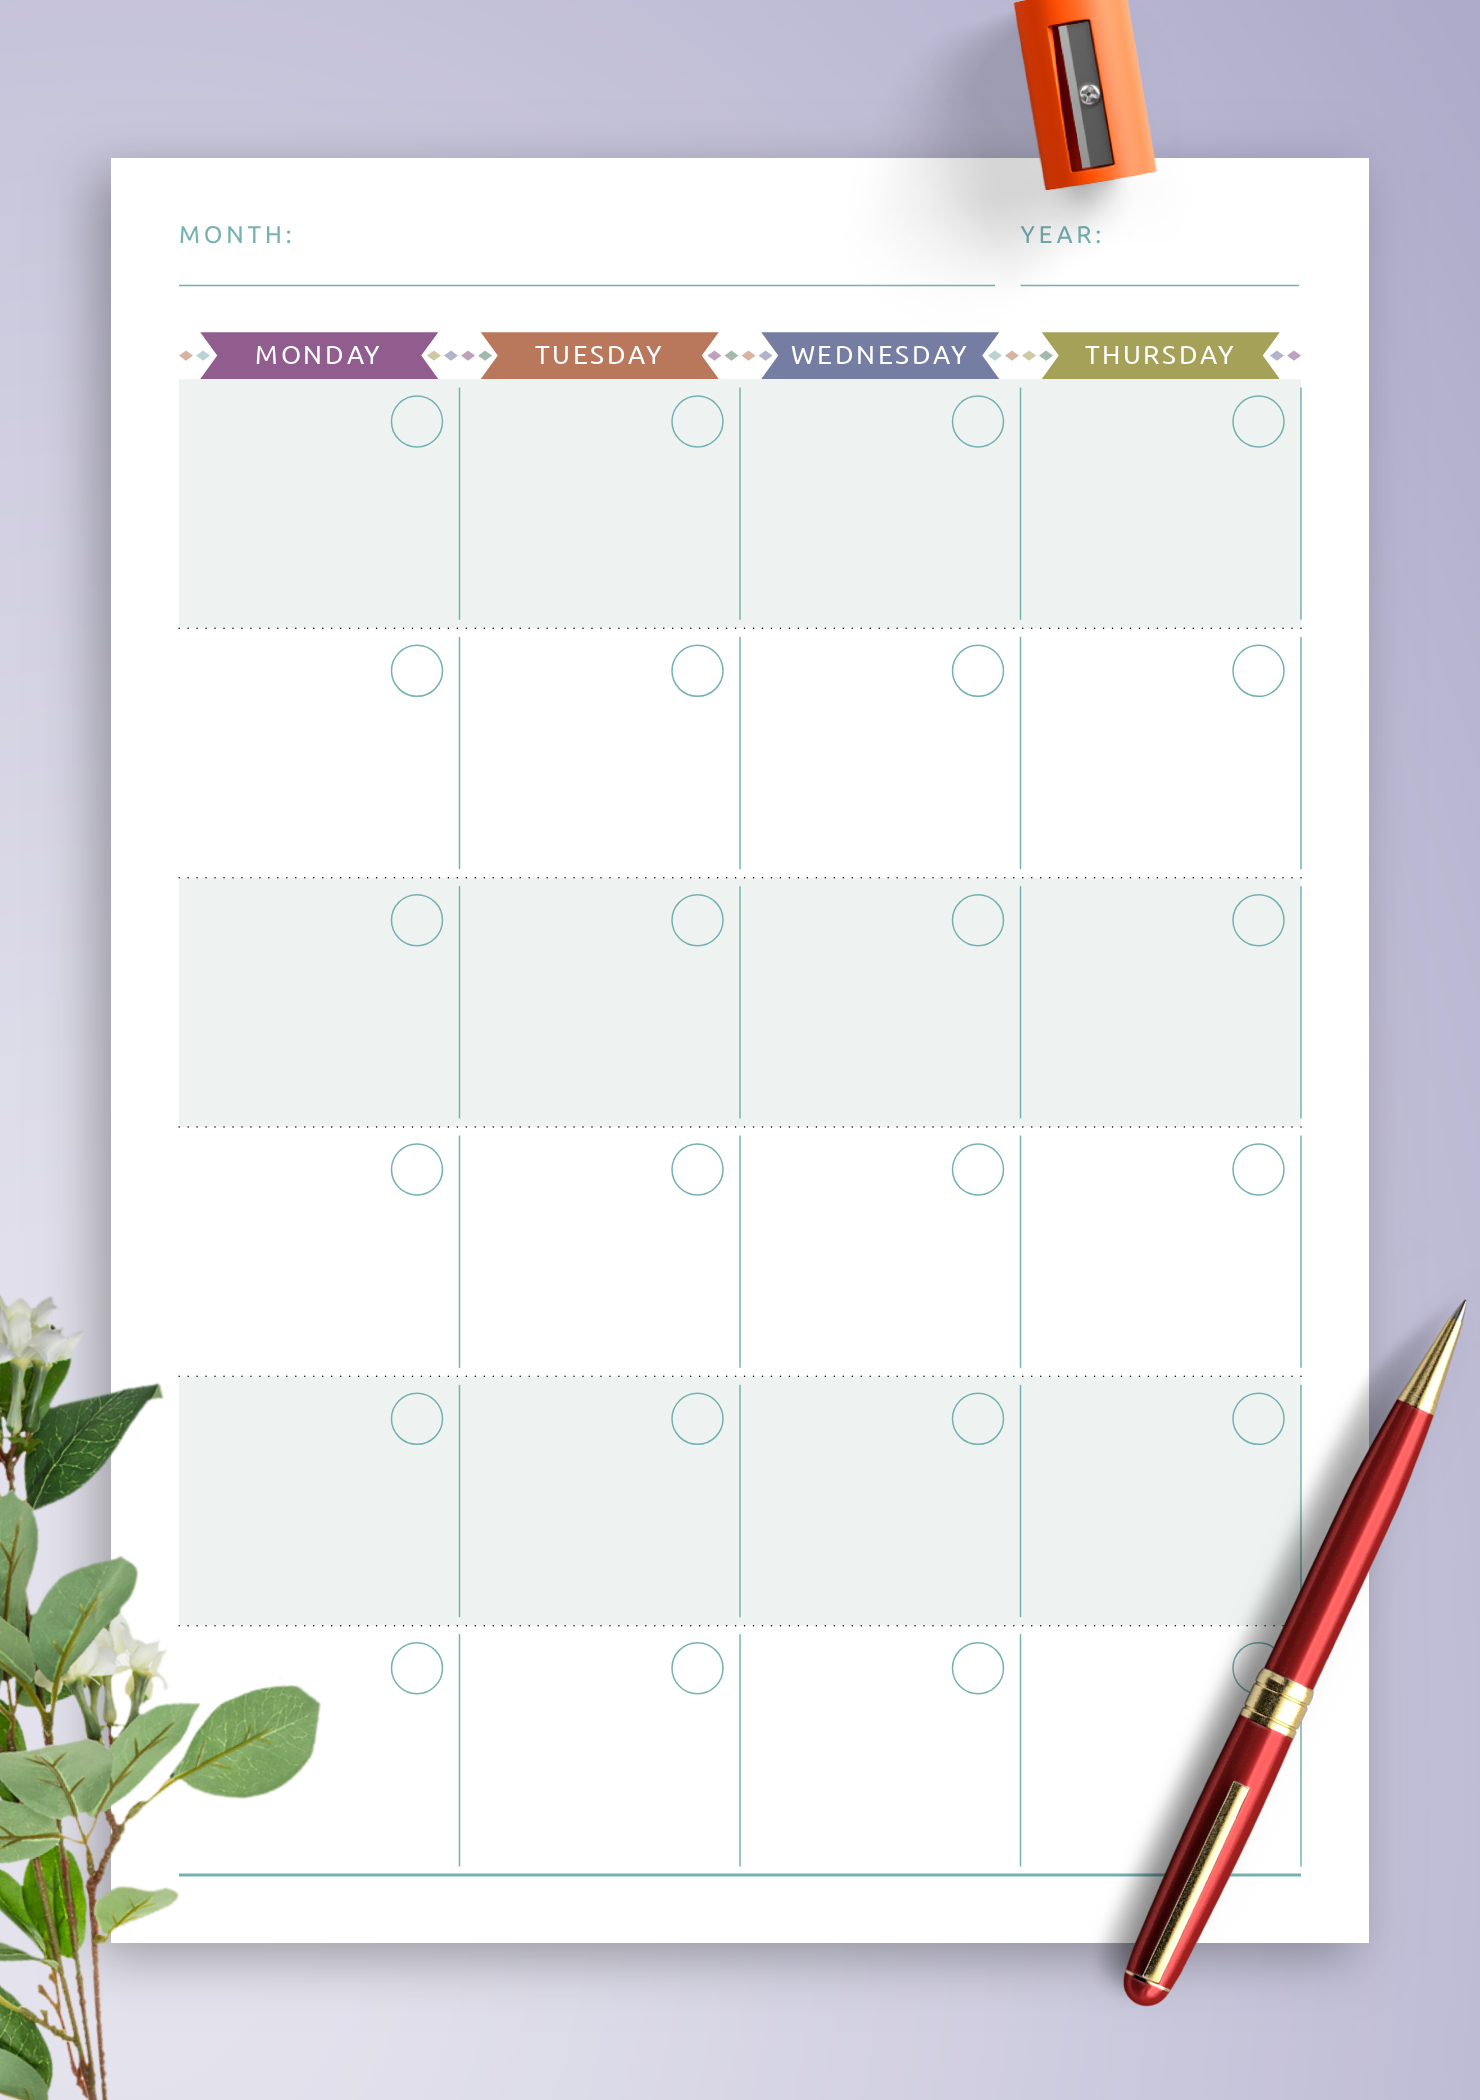 Download Printable Monthly Calendar Planner Undated - Casual Style Pdf